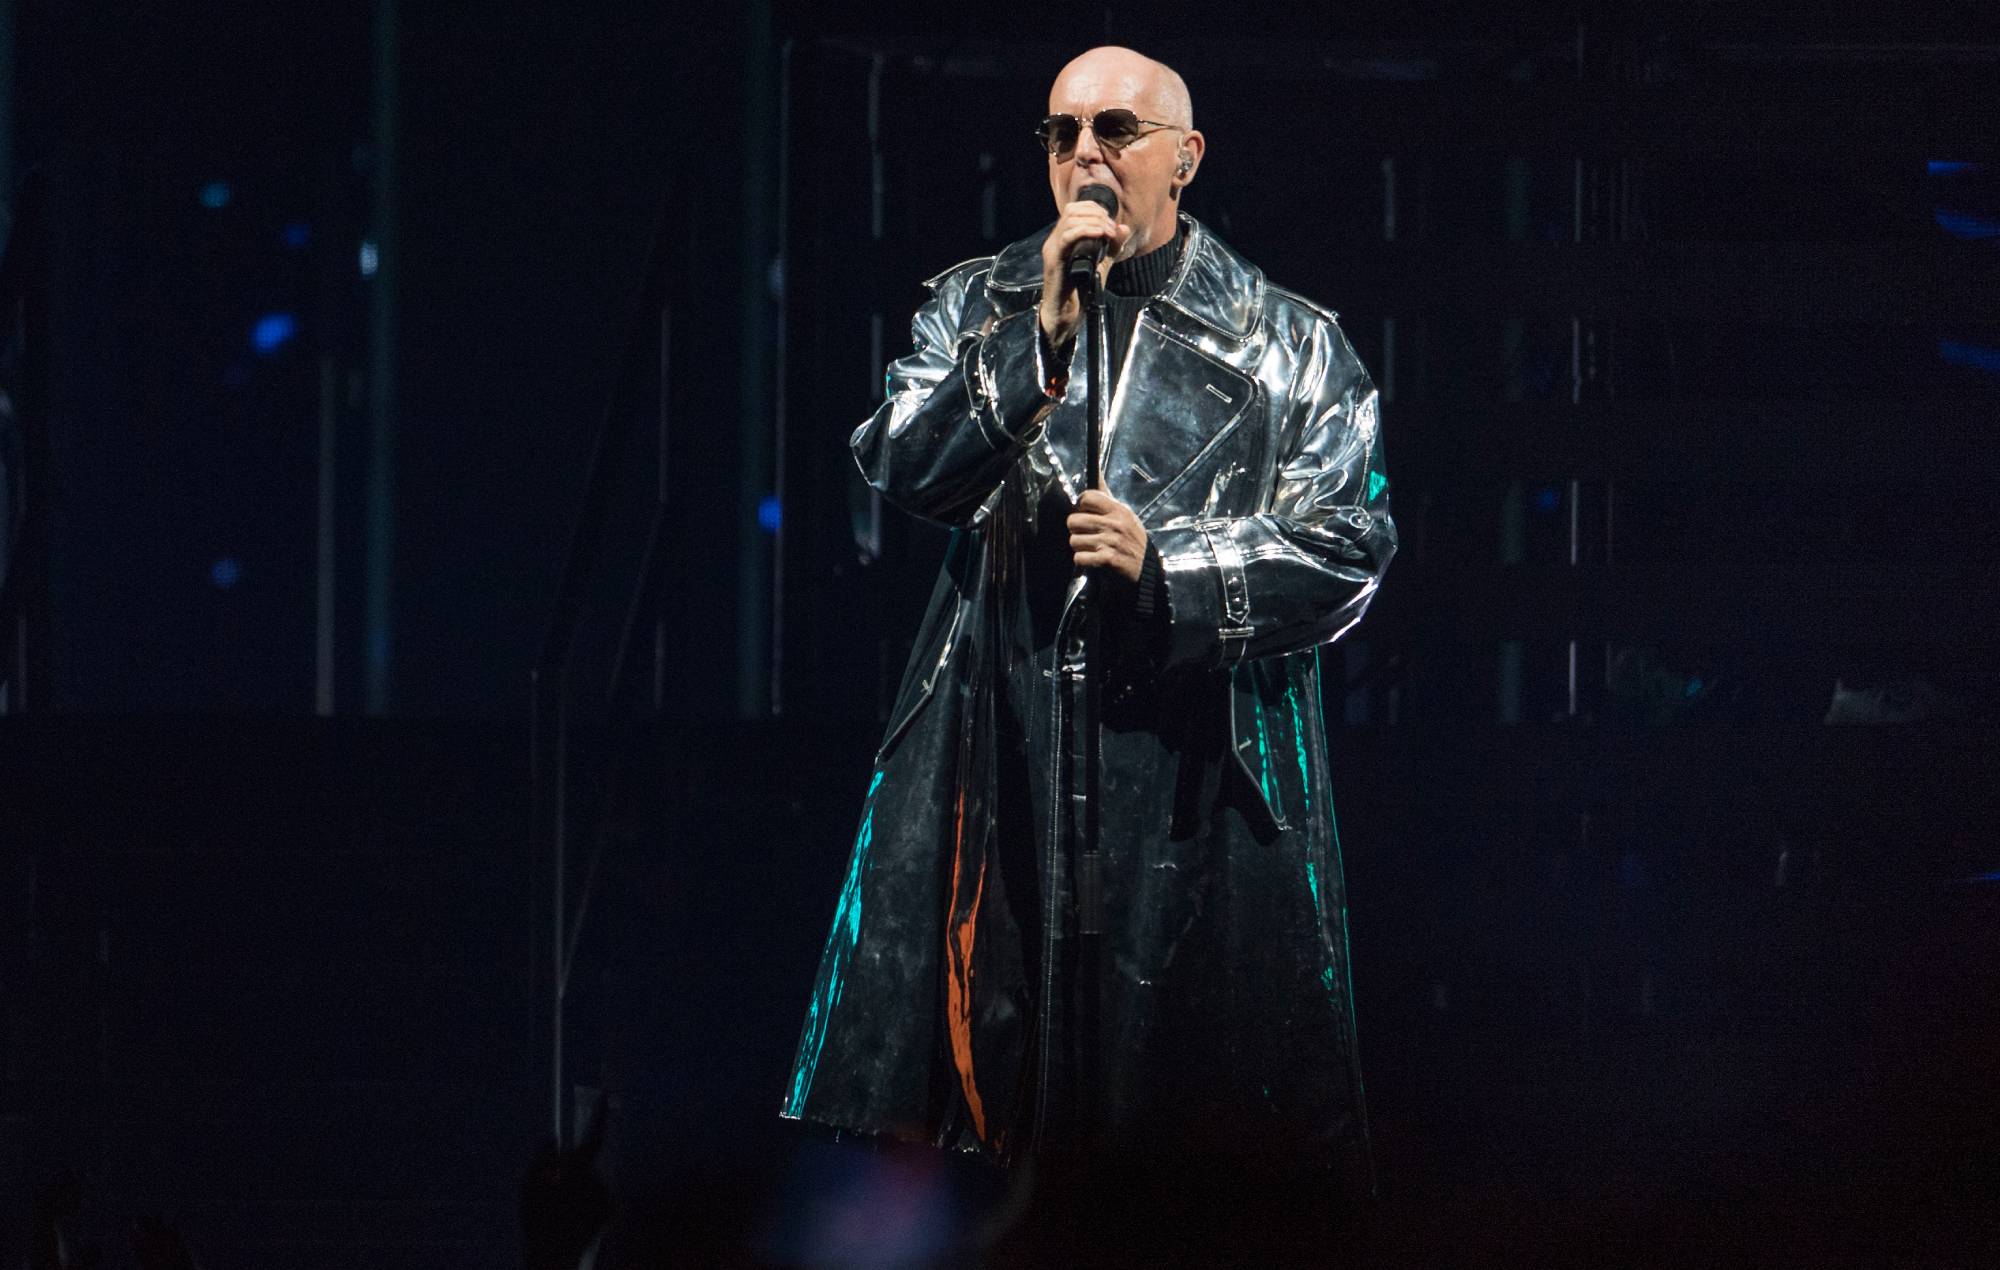 Pet Shop Boys’ Neil Tennant reveals the “worst moment” of his life at Glastonbury